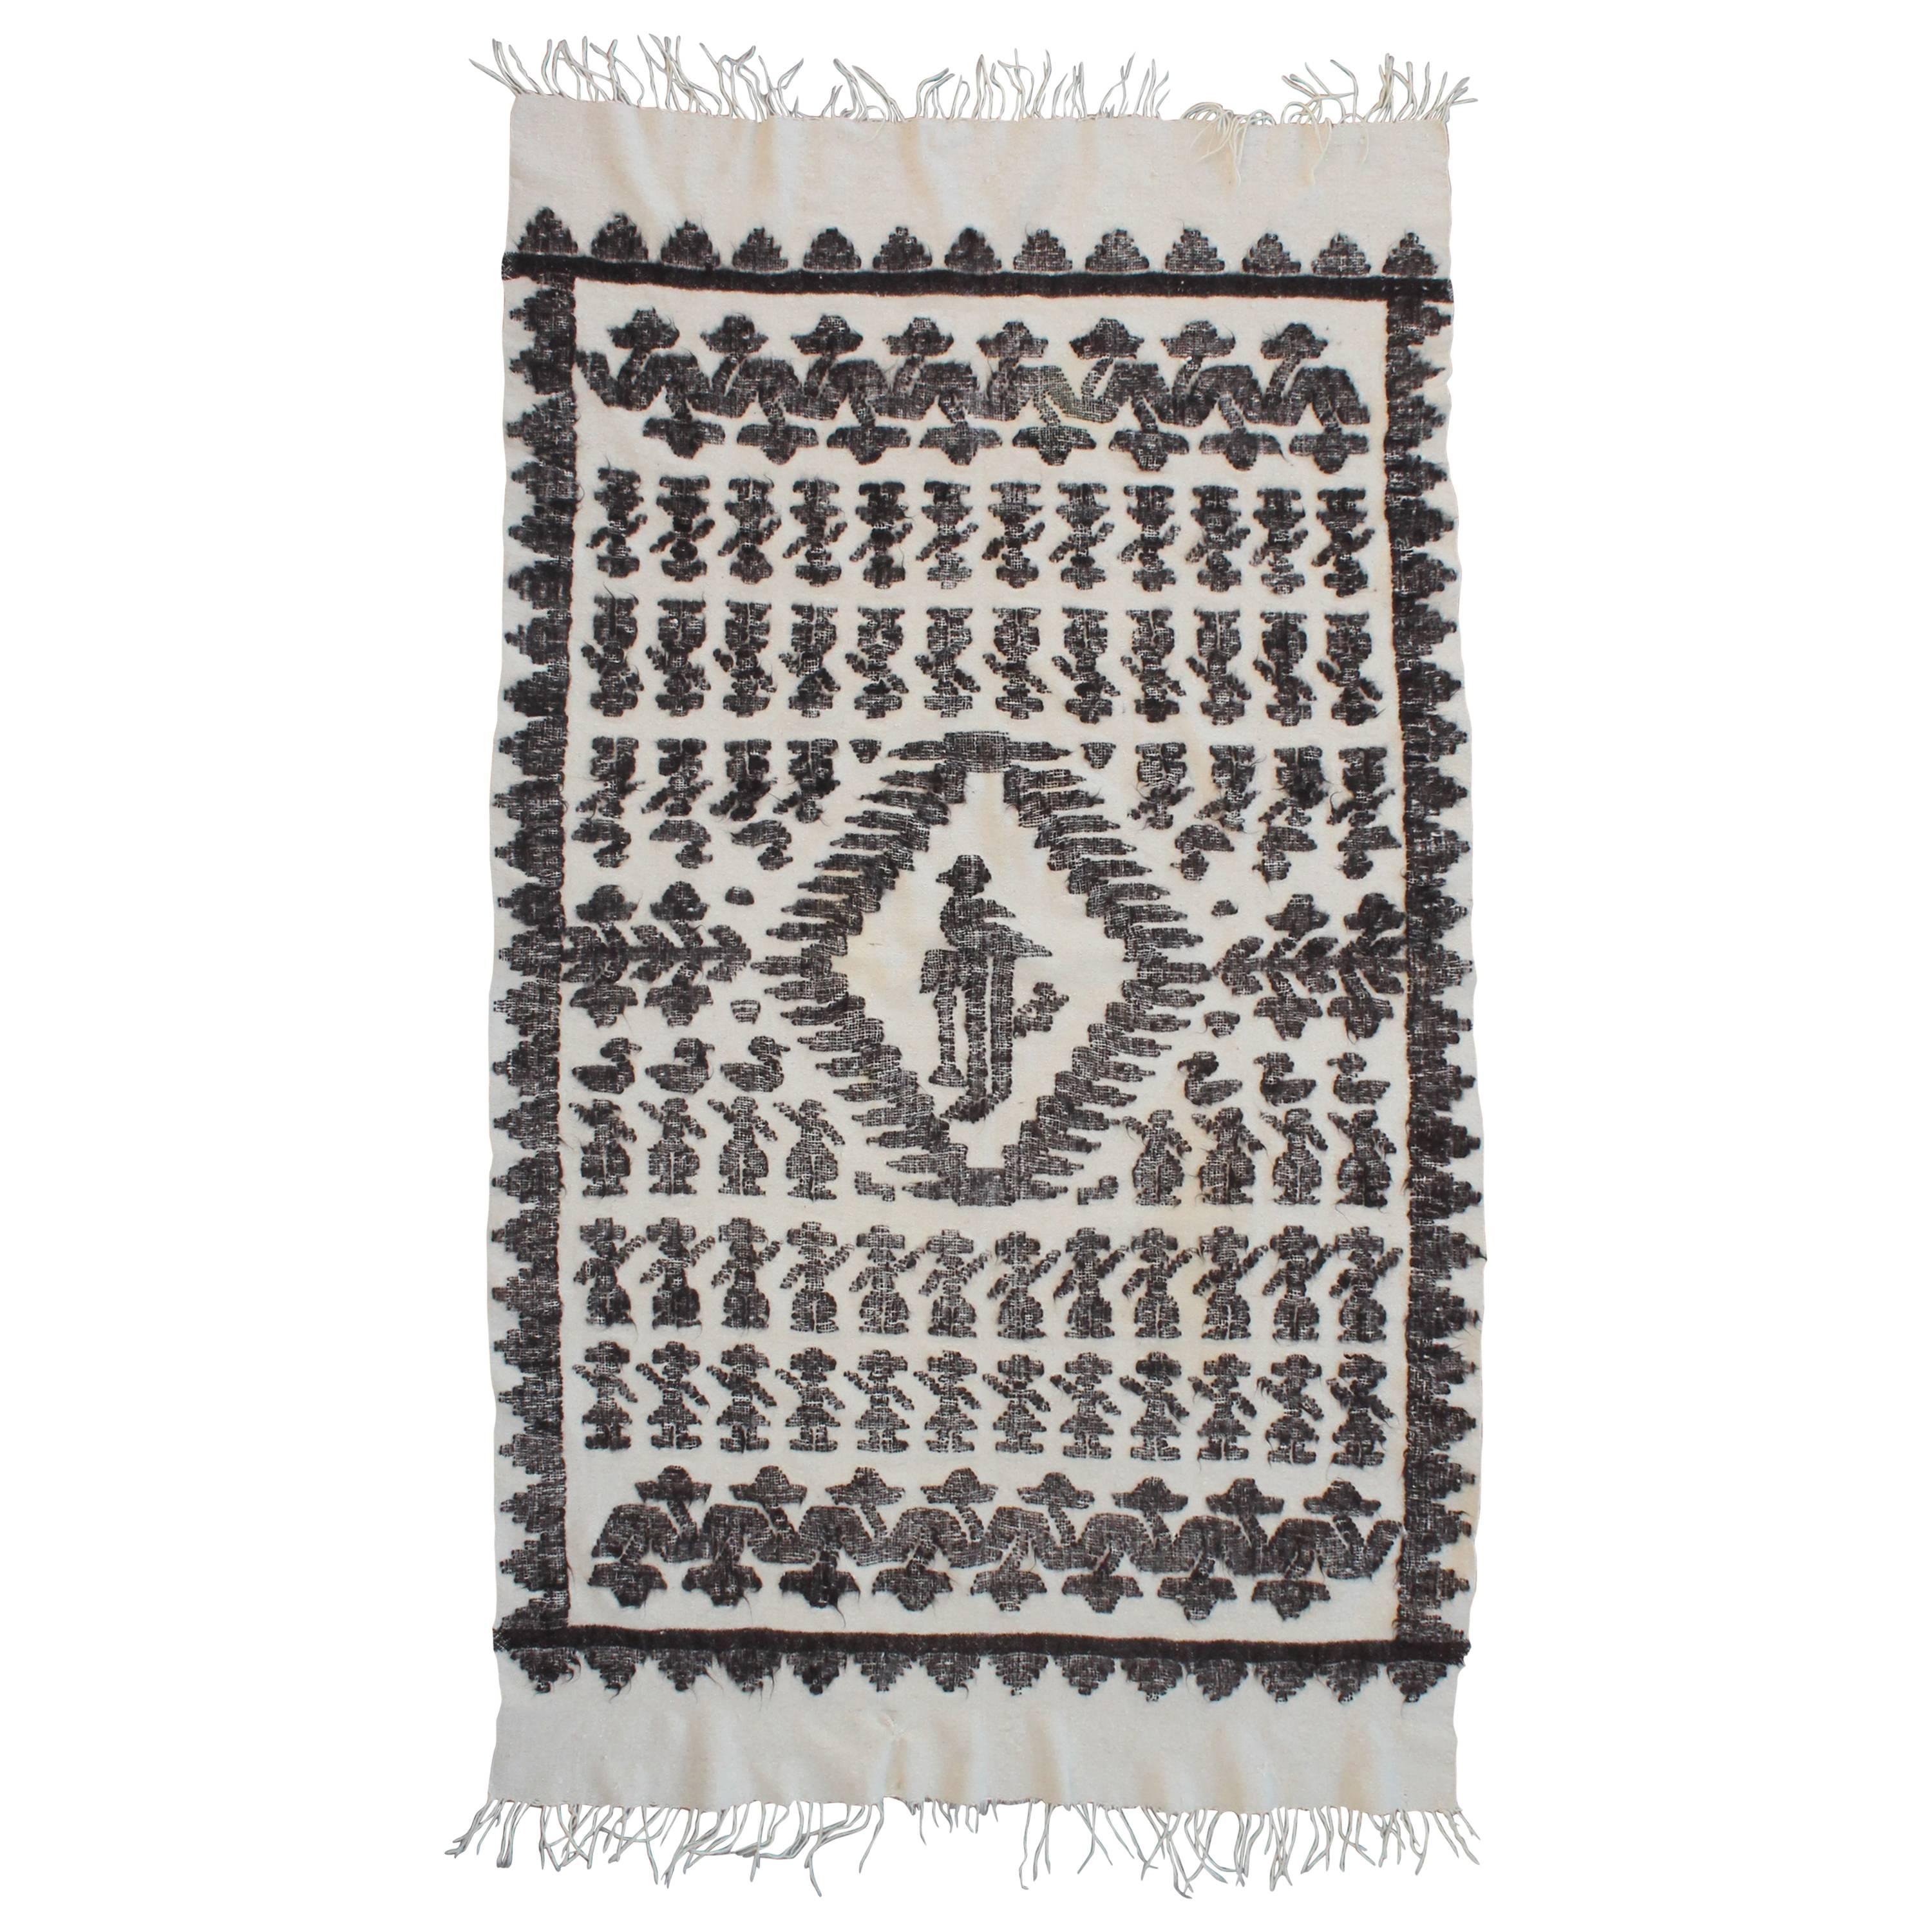 19th Century Handwoven South American Indian Weaving